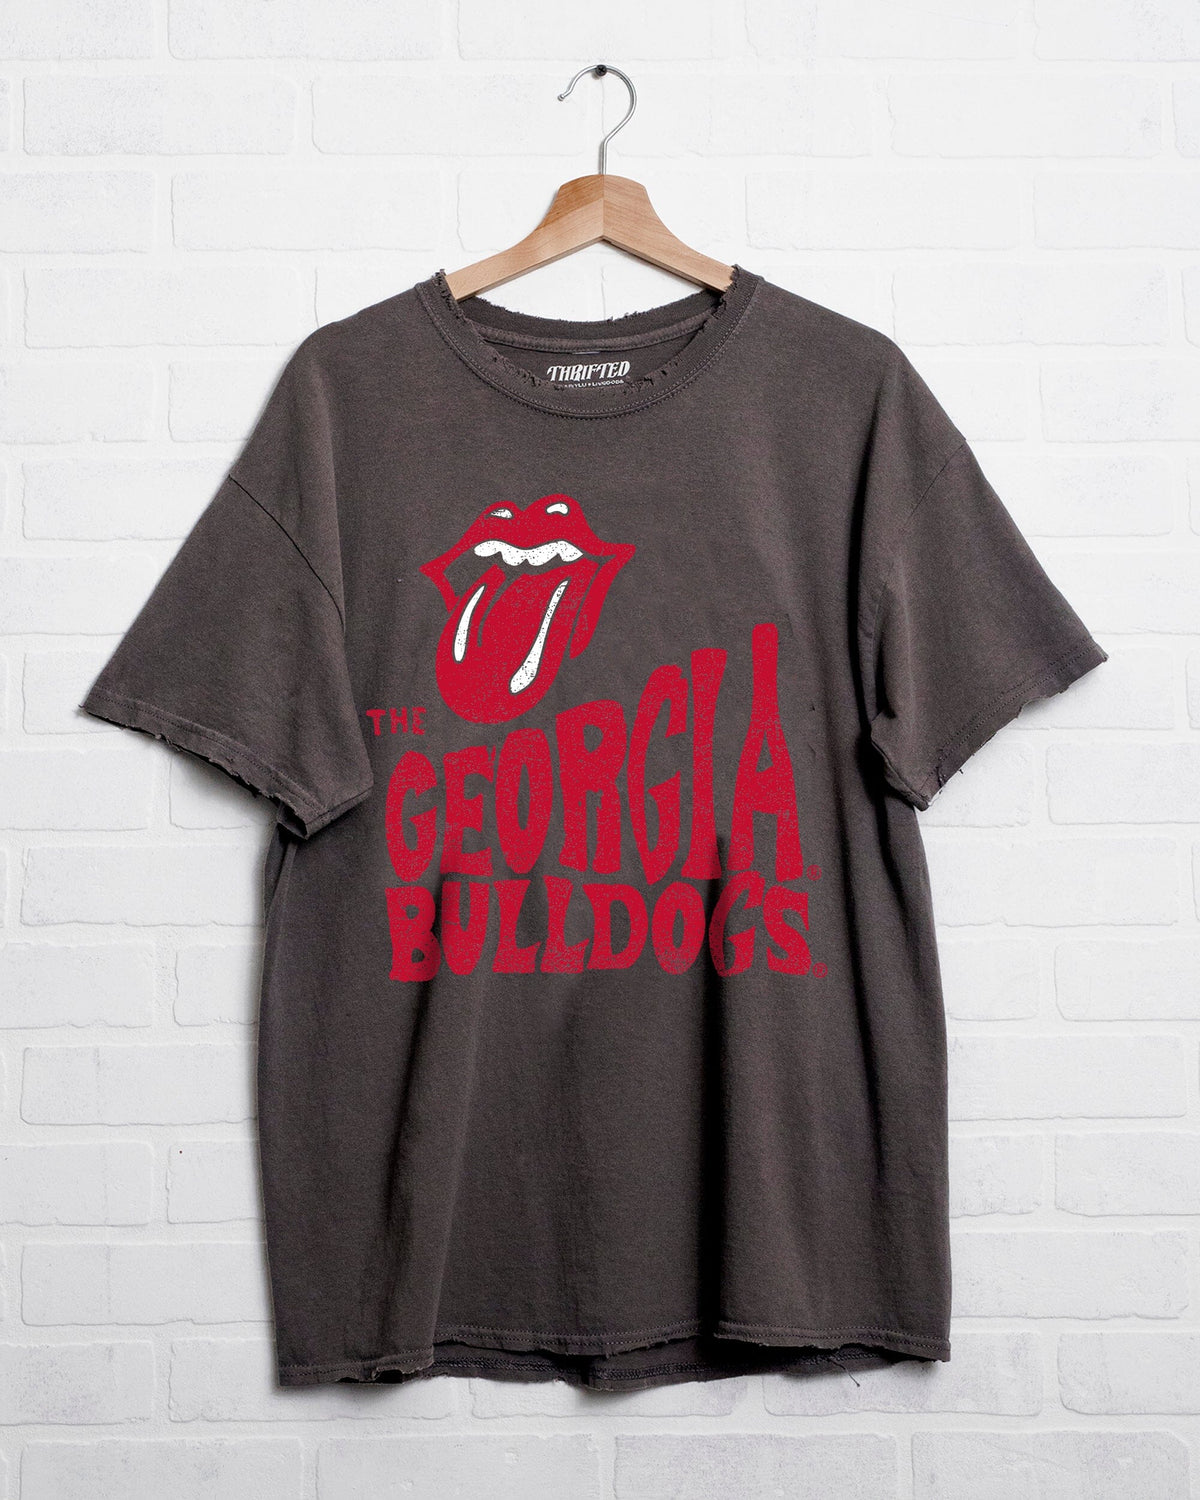 Rolling Stones UGA Bulldogs Dazed Charcoal Thrifted Tee